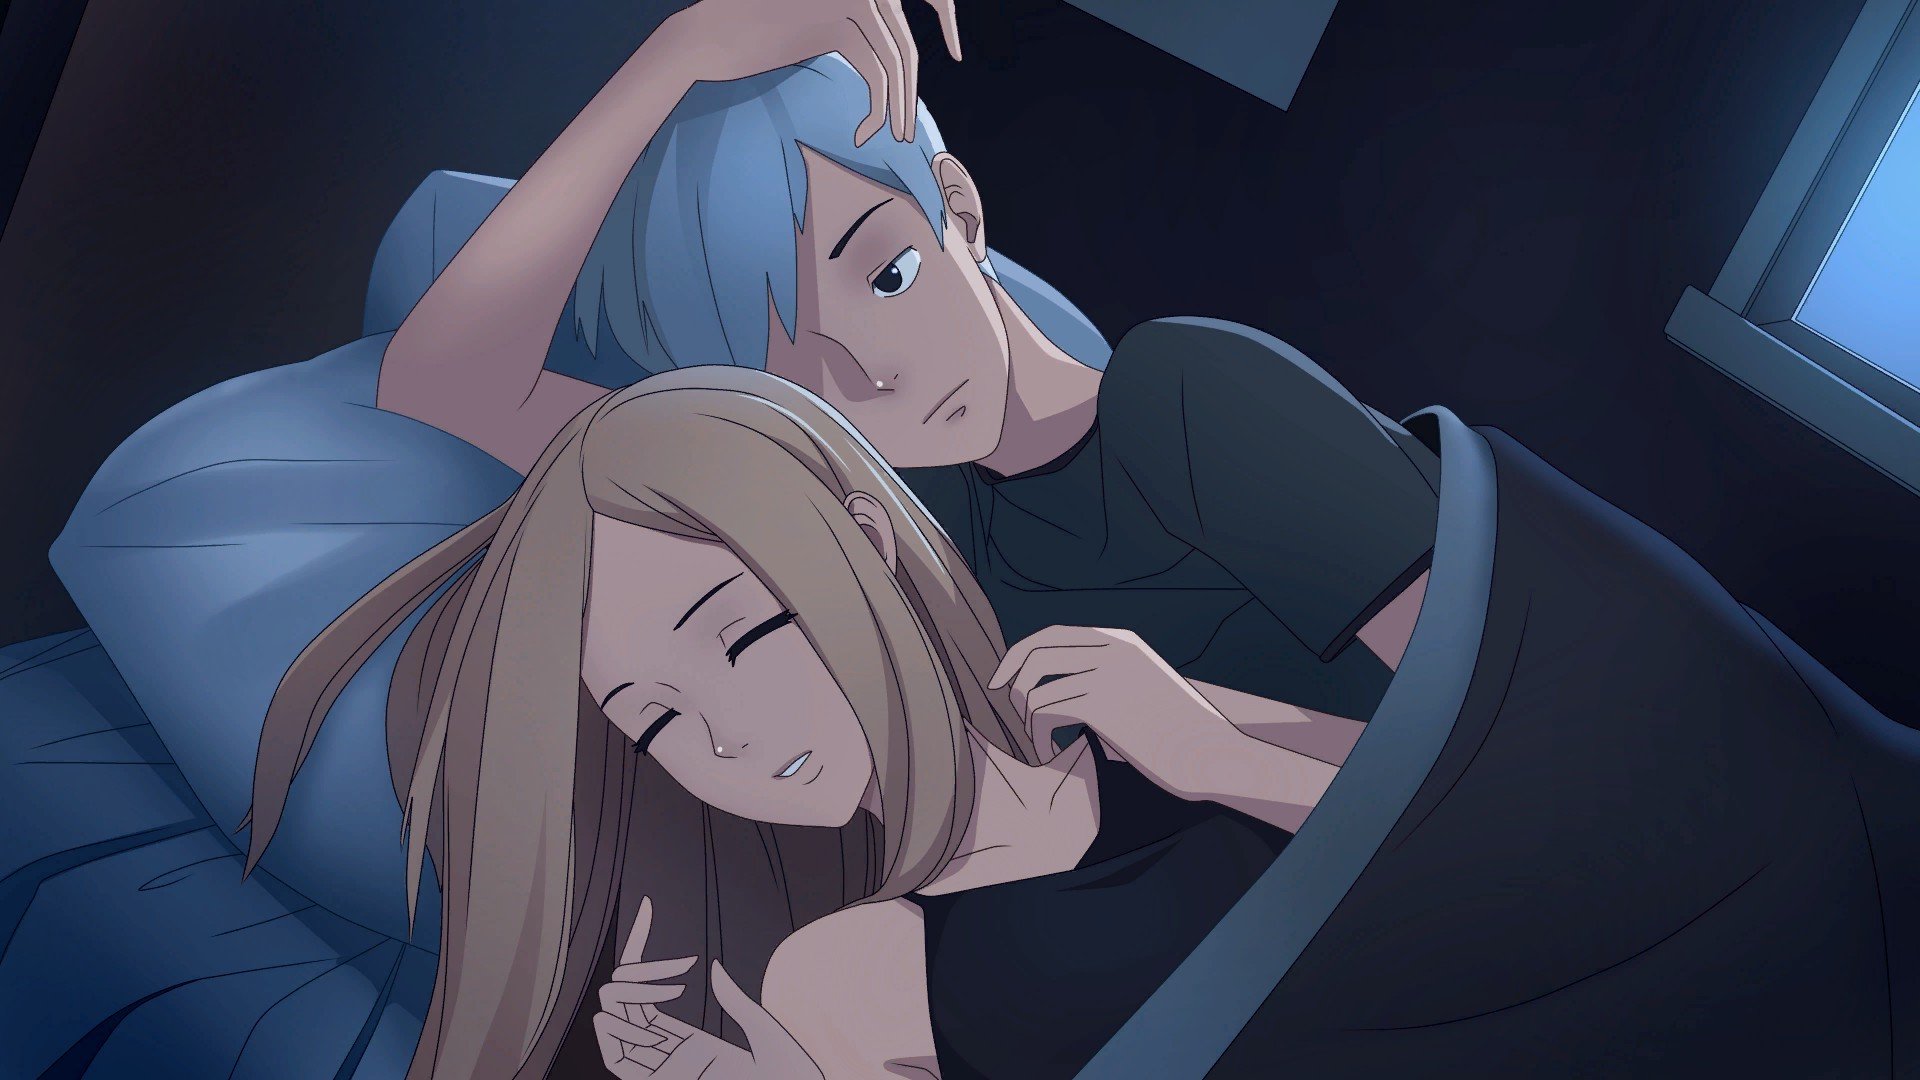 Ophelia and Kiel in bed together